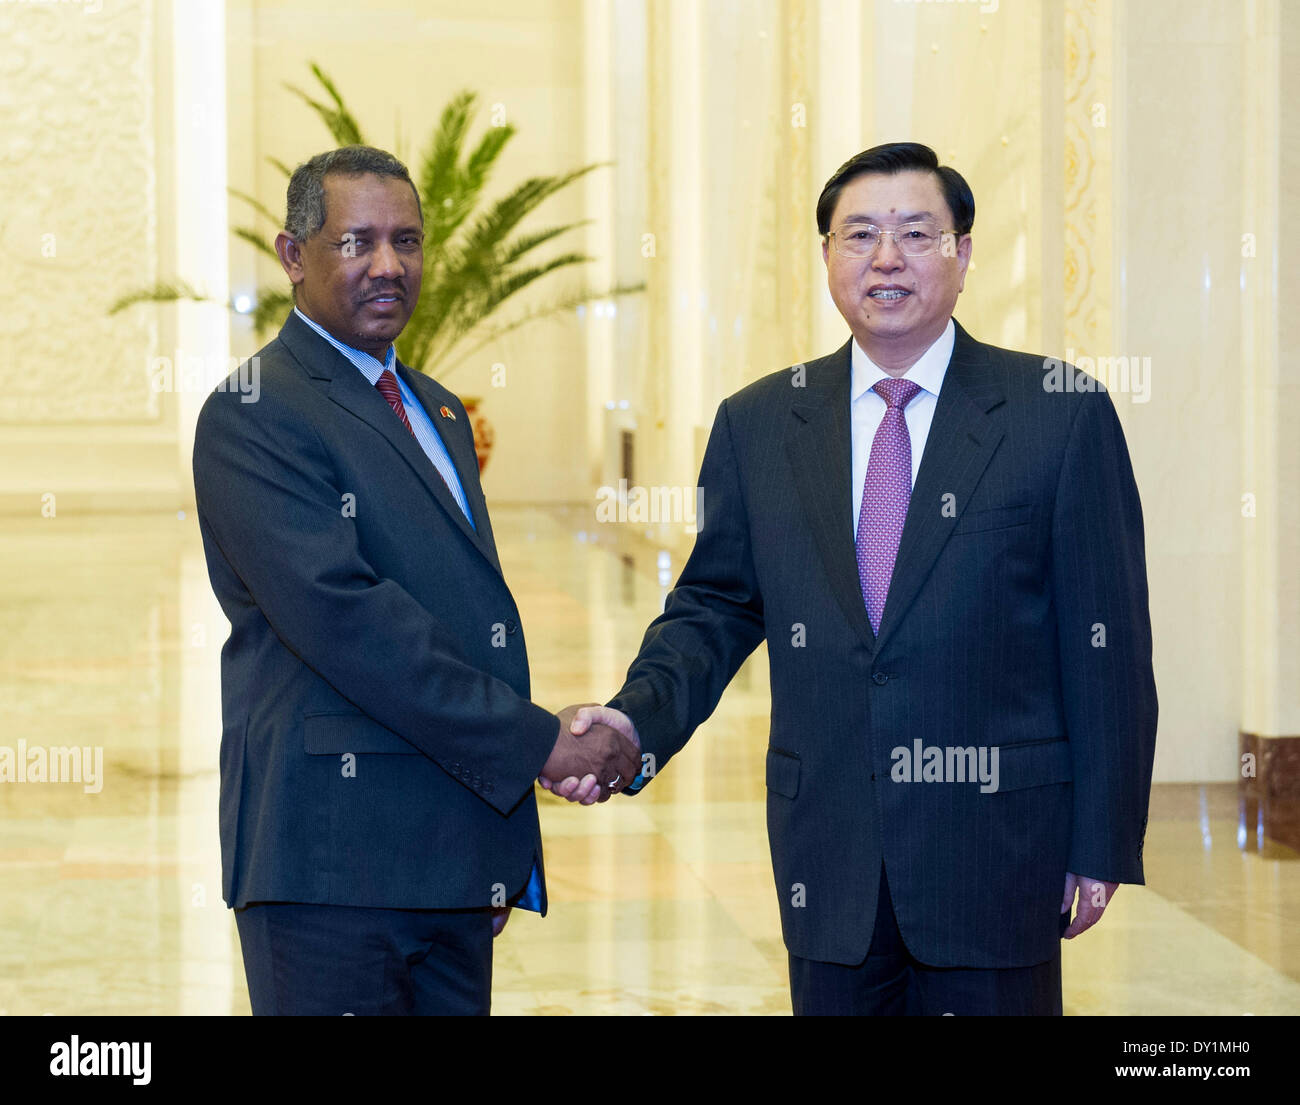 Beijing, China. 3rd Apr, 2014. Zhang Dejiang (R), chairman of China's National People's Congress Standing Committee, shakes hands with Fatih Ezzedine al-Mansur, speaker of the National Assembly of the Republic of the Sudan, during their talks in Beijing, capital of China, April 3, 2014. © Wang Ye/Xinhua/Alamy Live News Stock Photo